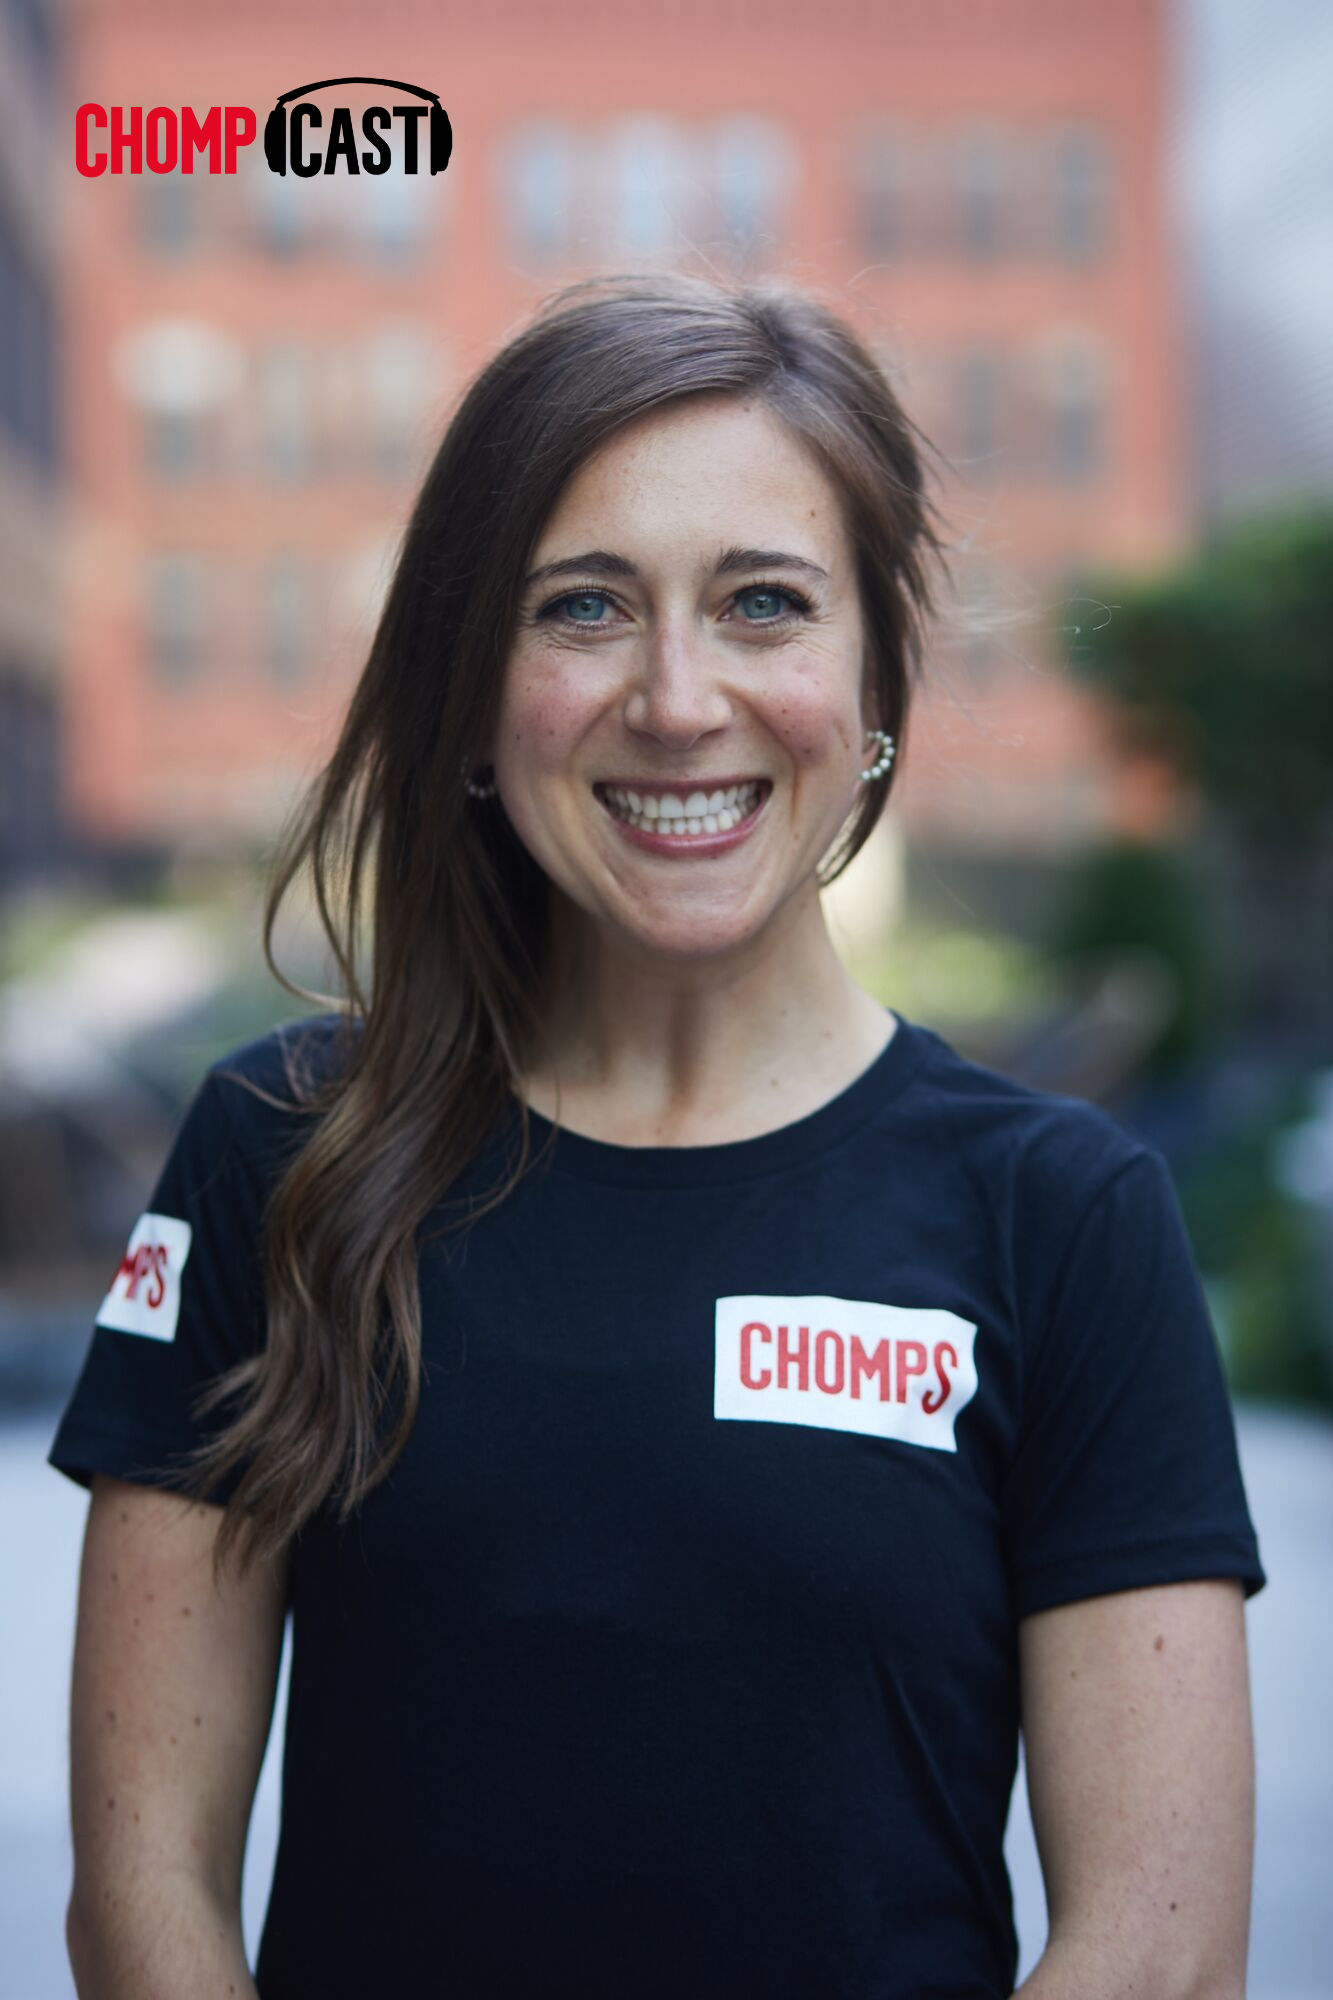 Chompcast Episode 3 with Haley Clements, Manager of Sales Operations at Chomps